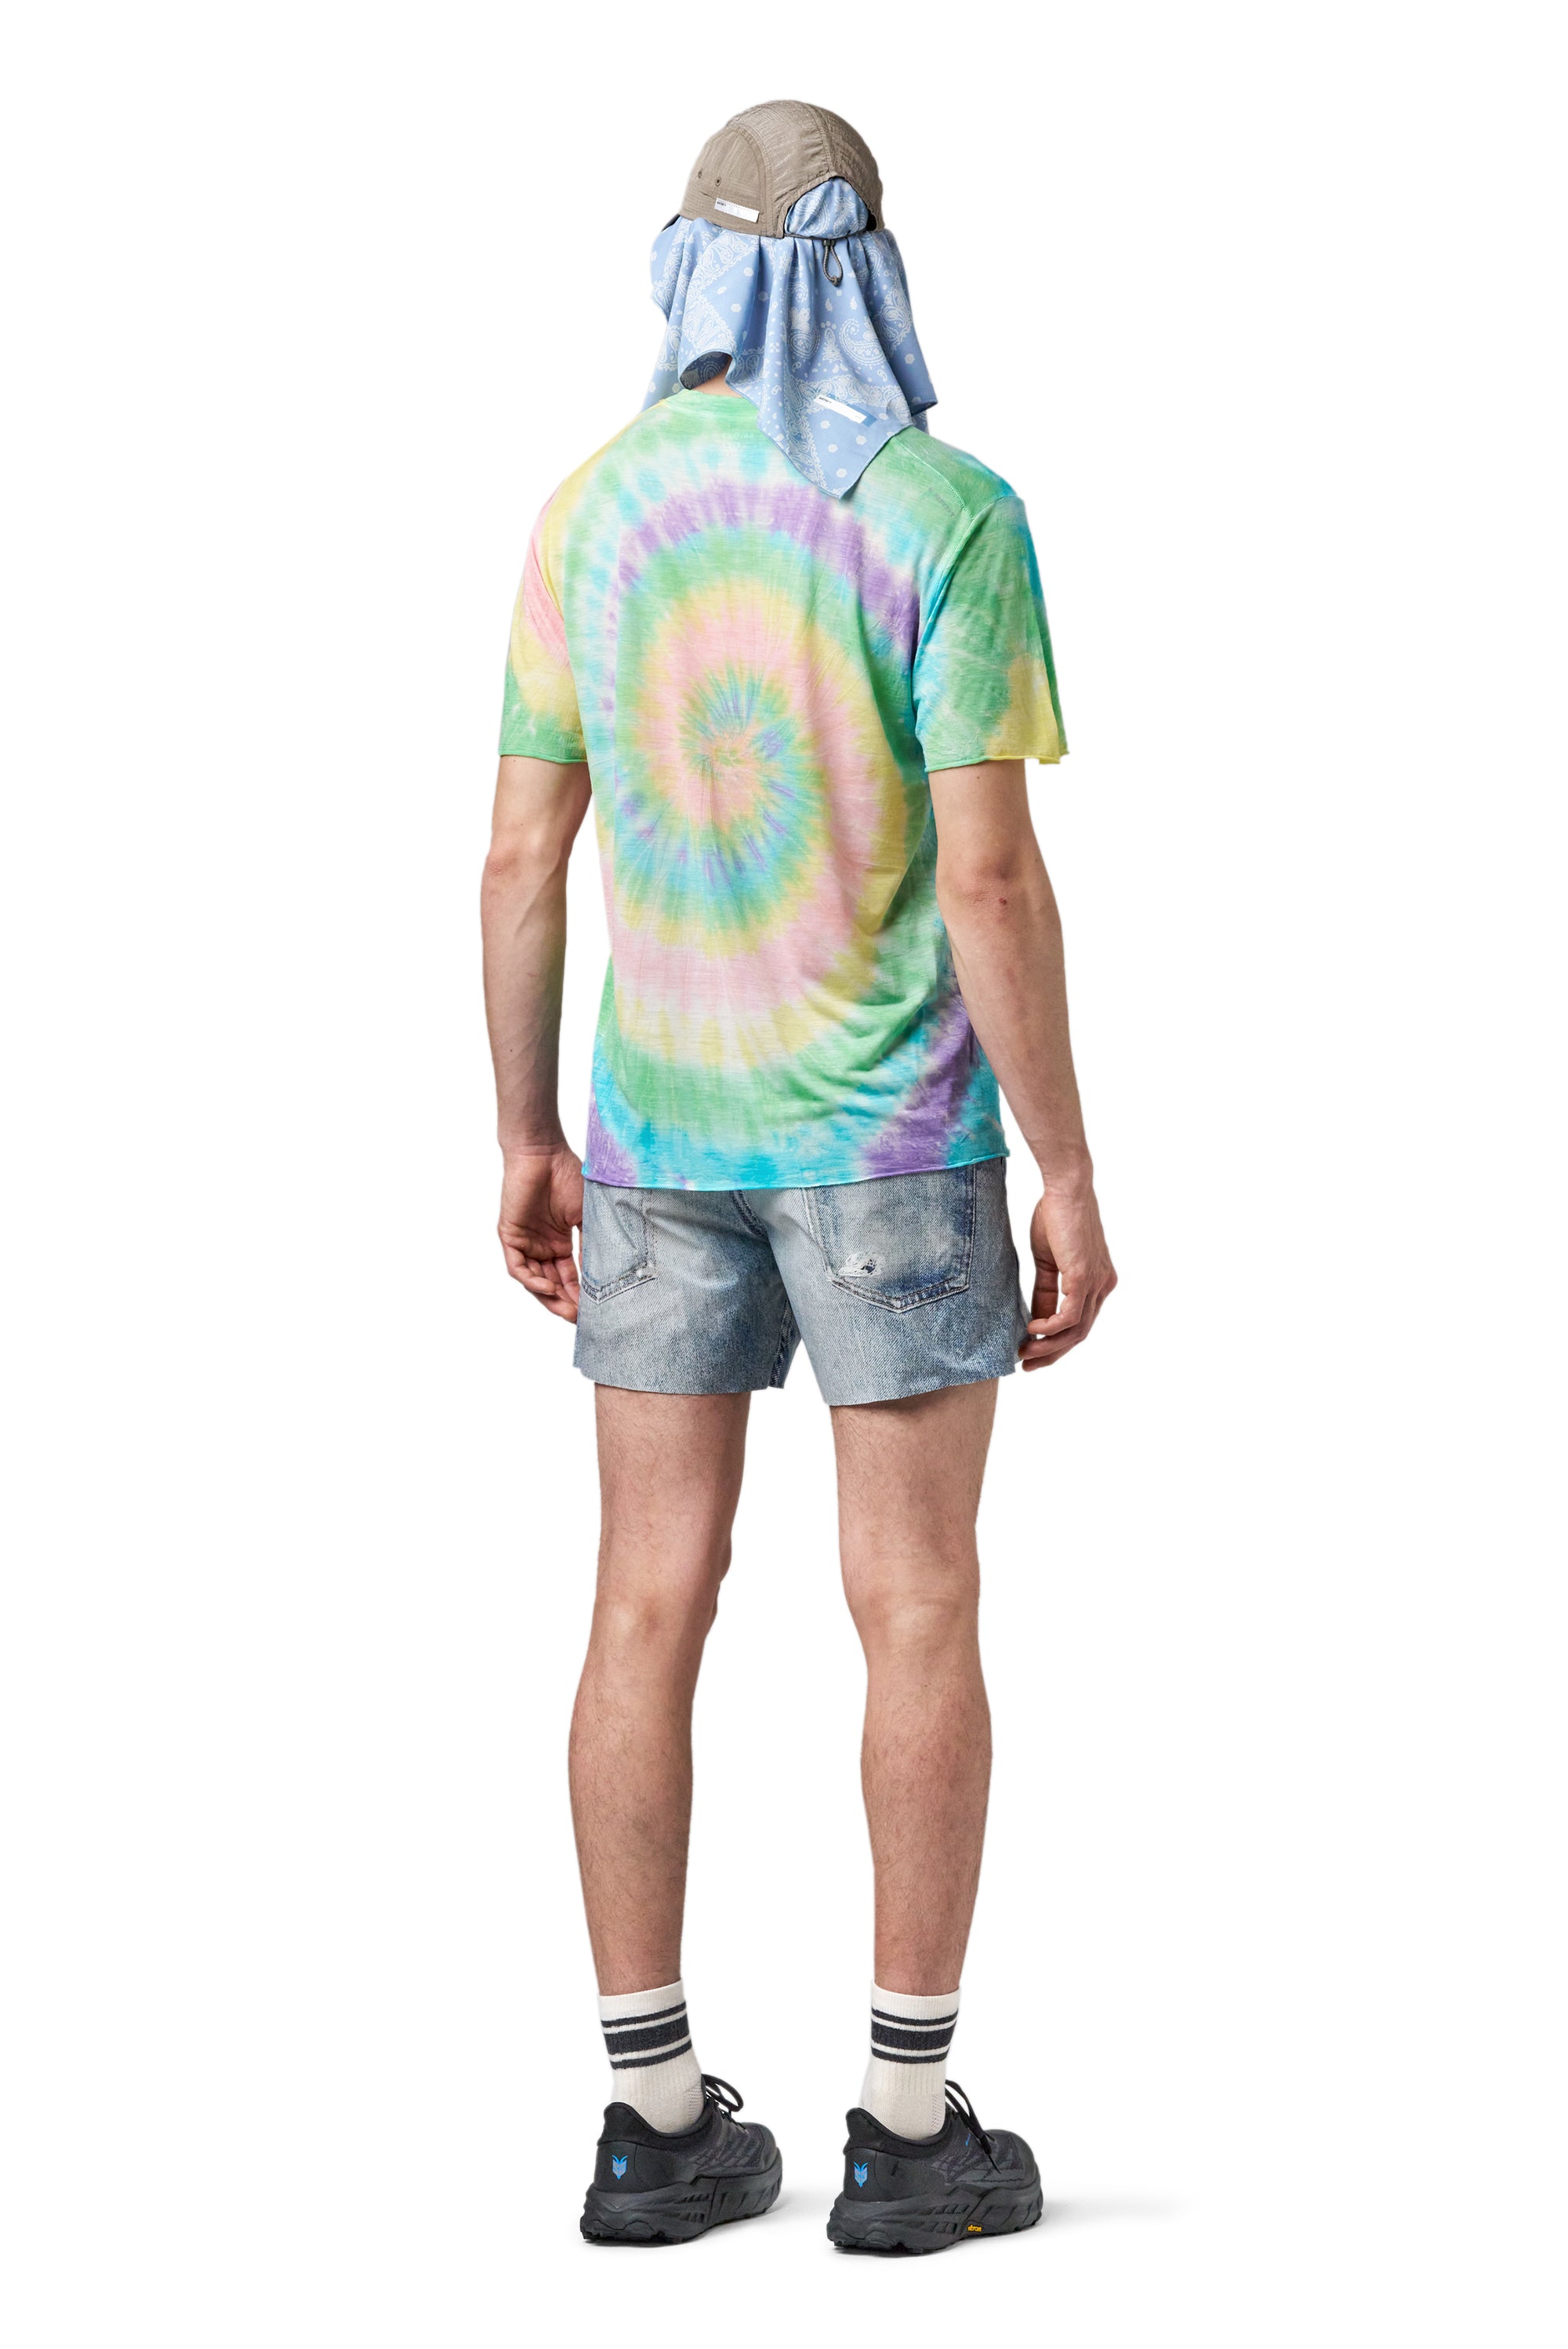 SATISFY - CloudMerino T-Shirt - Psych Tie-Dye - Space Camp